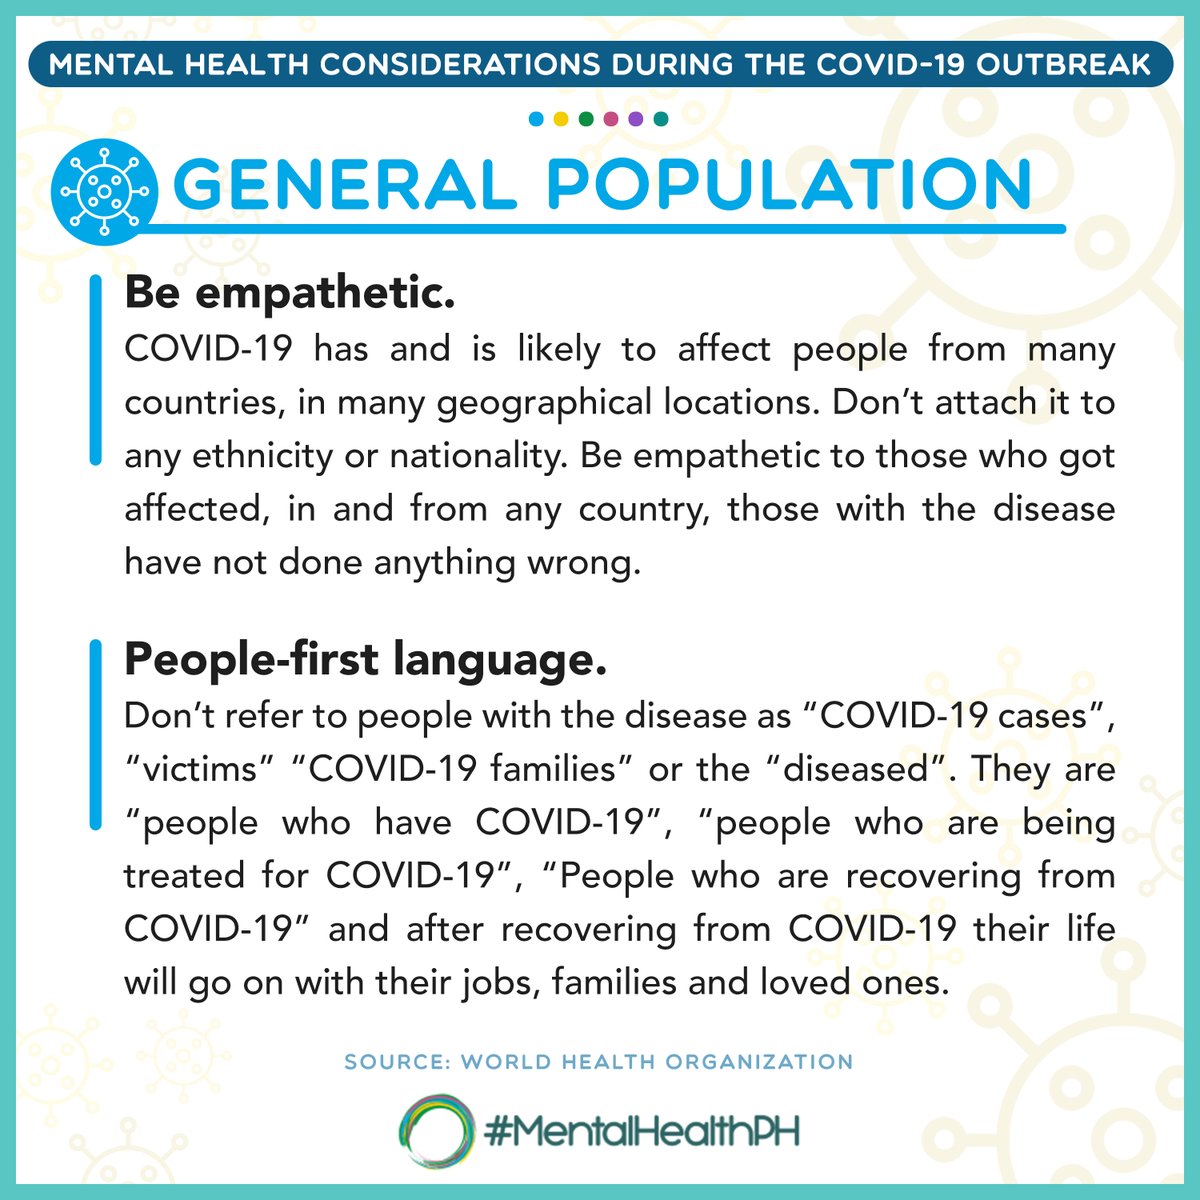 [Mental Health Considerations during COVID-19 Outbreak]For the General Population  #MentalHealthPH  #COVID19 (Source:  @WHO )